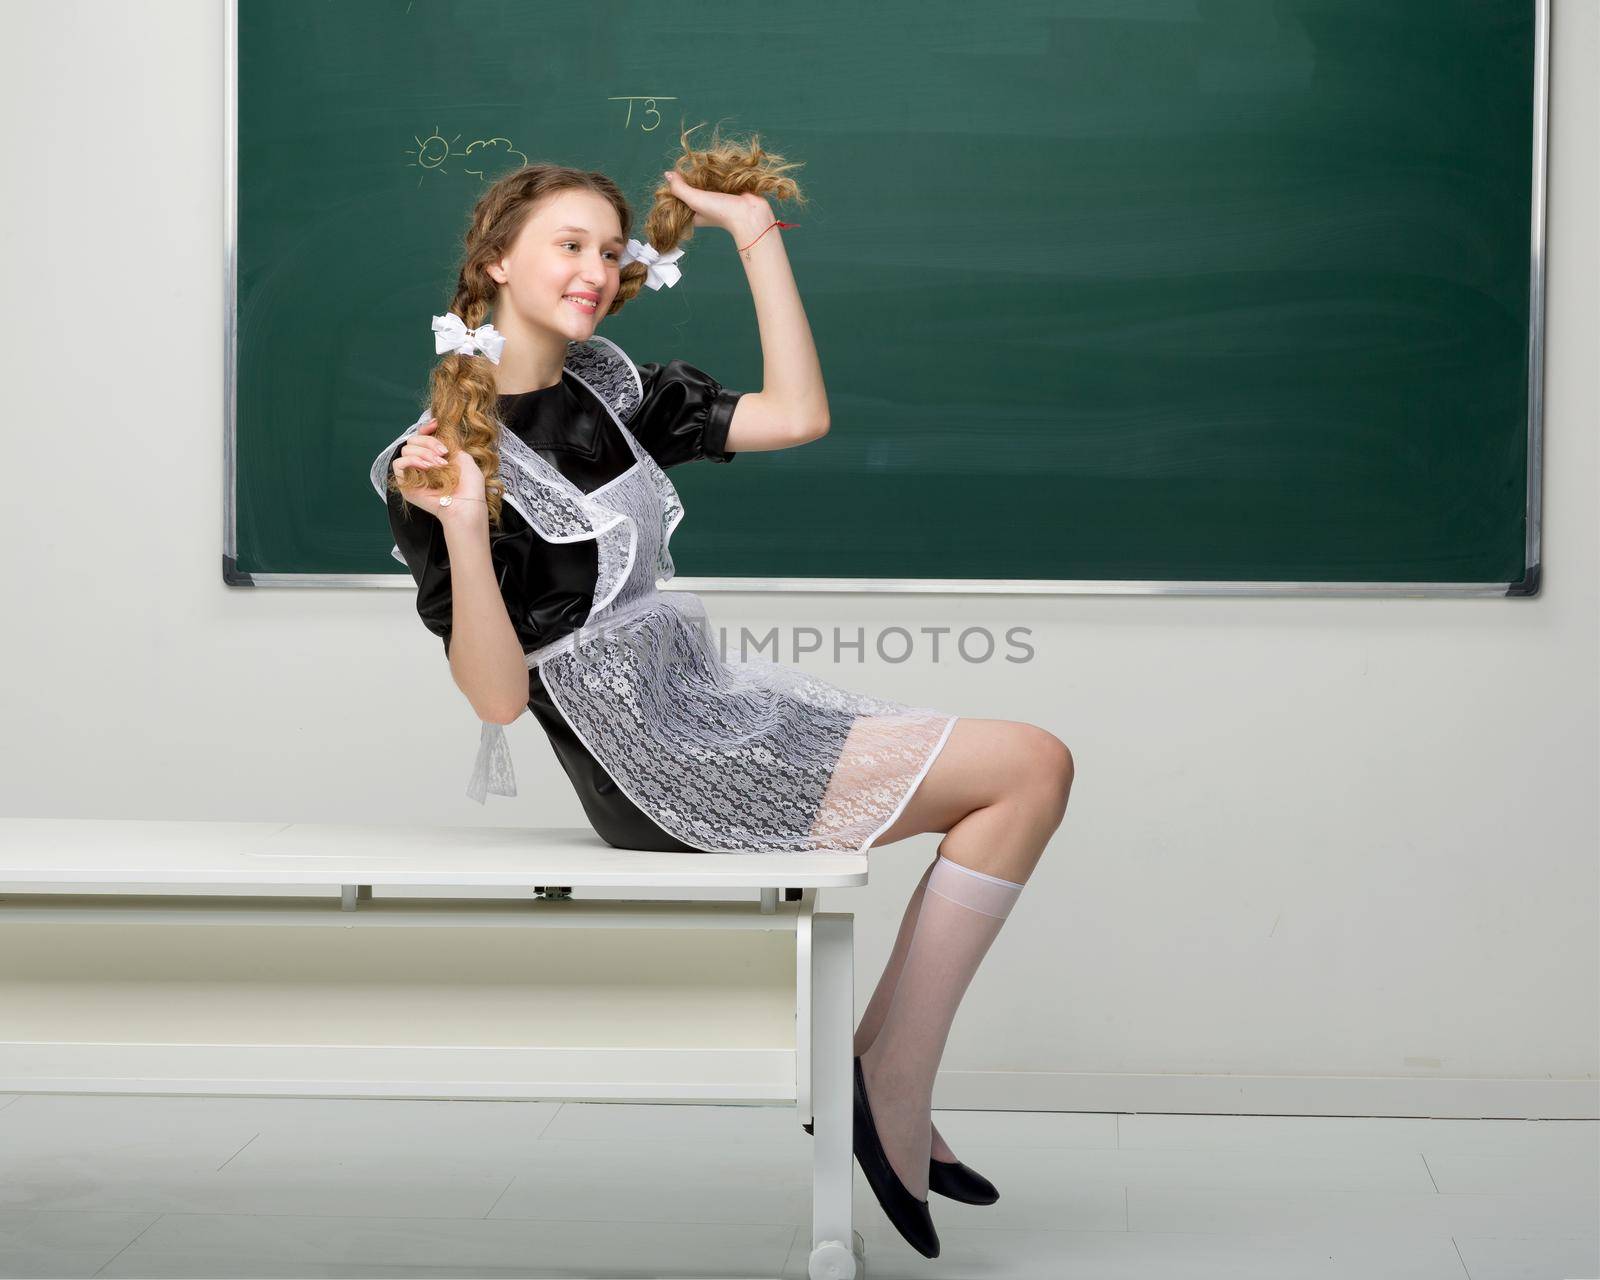 Joyful girl student holding her two long braids. Smiling pretty shoolgirl with braided in two plaits hair wearing retro soviet school uniform sitting on desk in front of blackboard